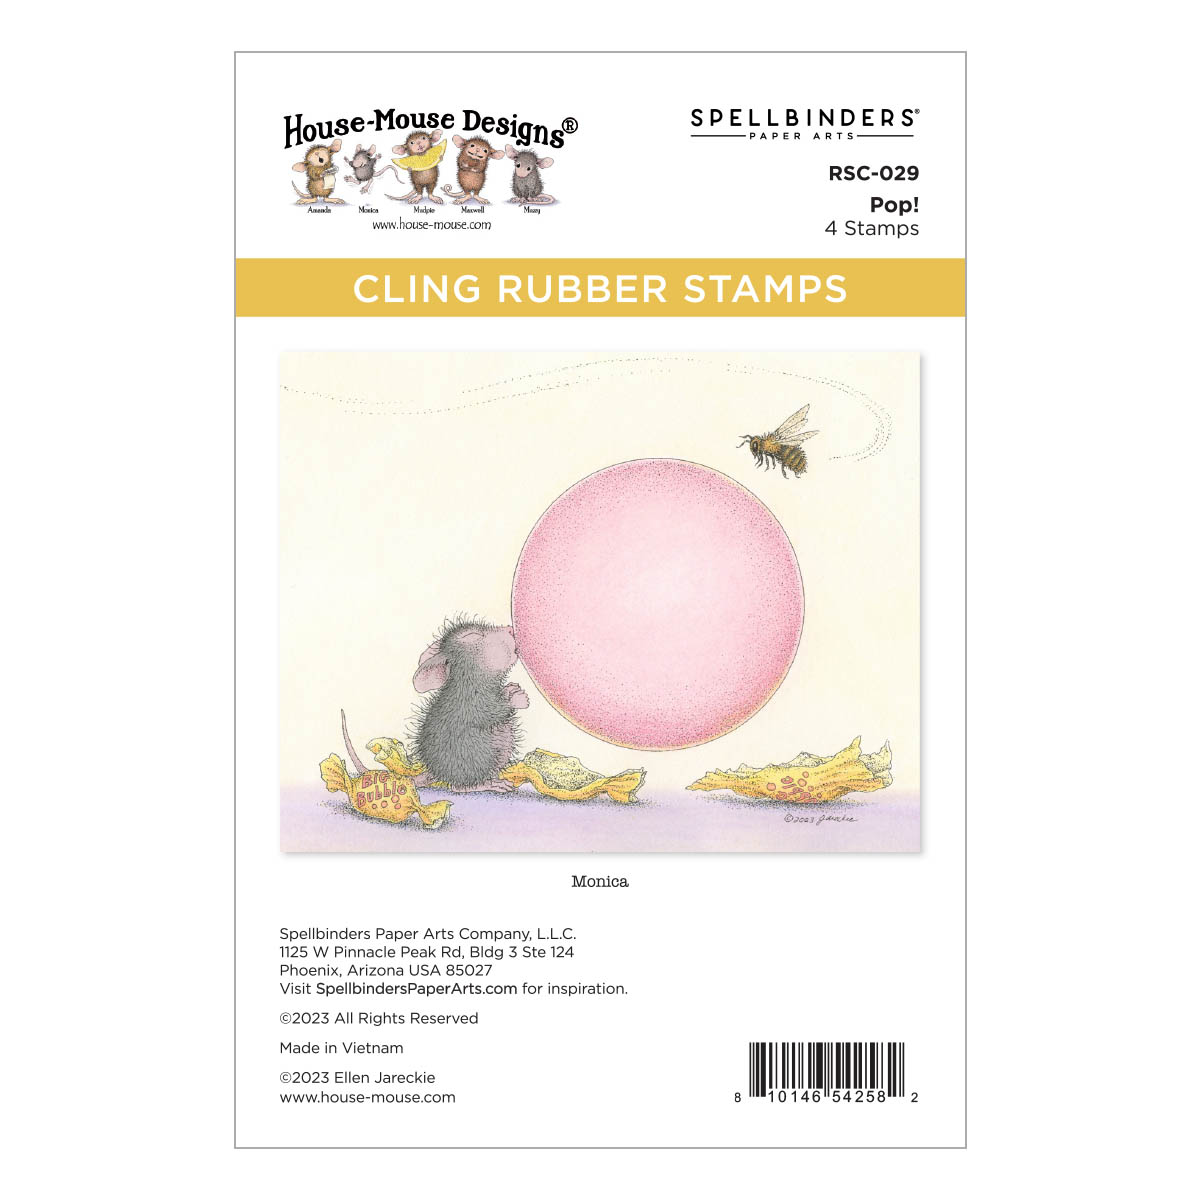 Spellbinders Pop! Cling Rubber Stamp Set From the House-mouse Summer Fun Collection